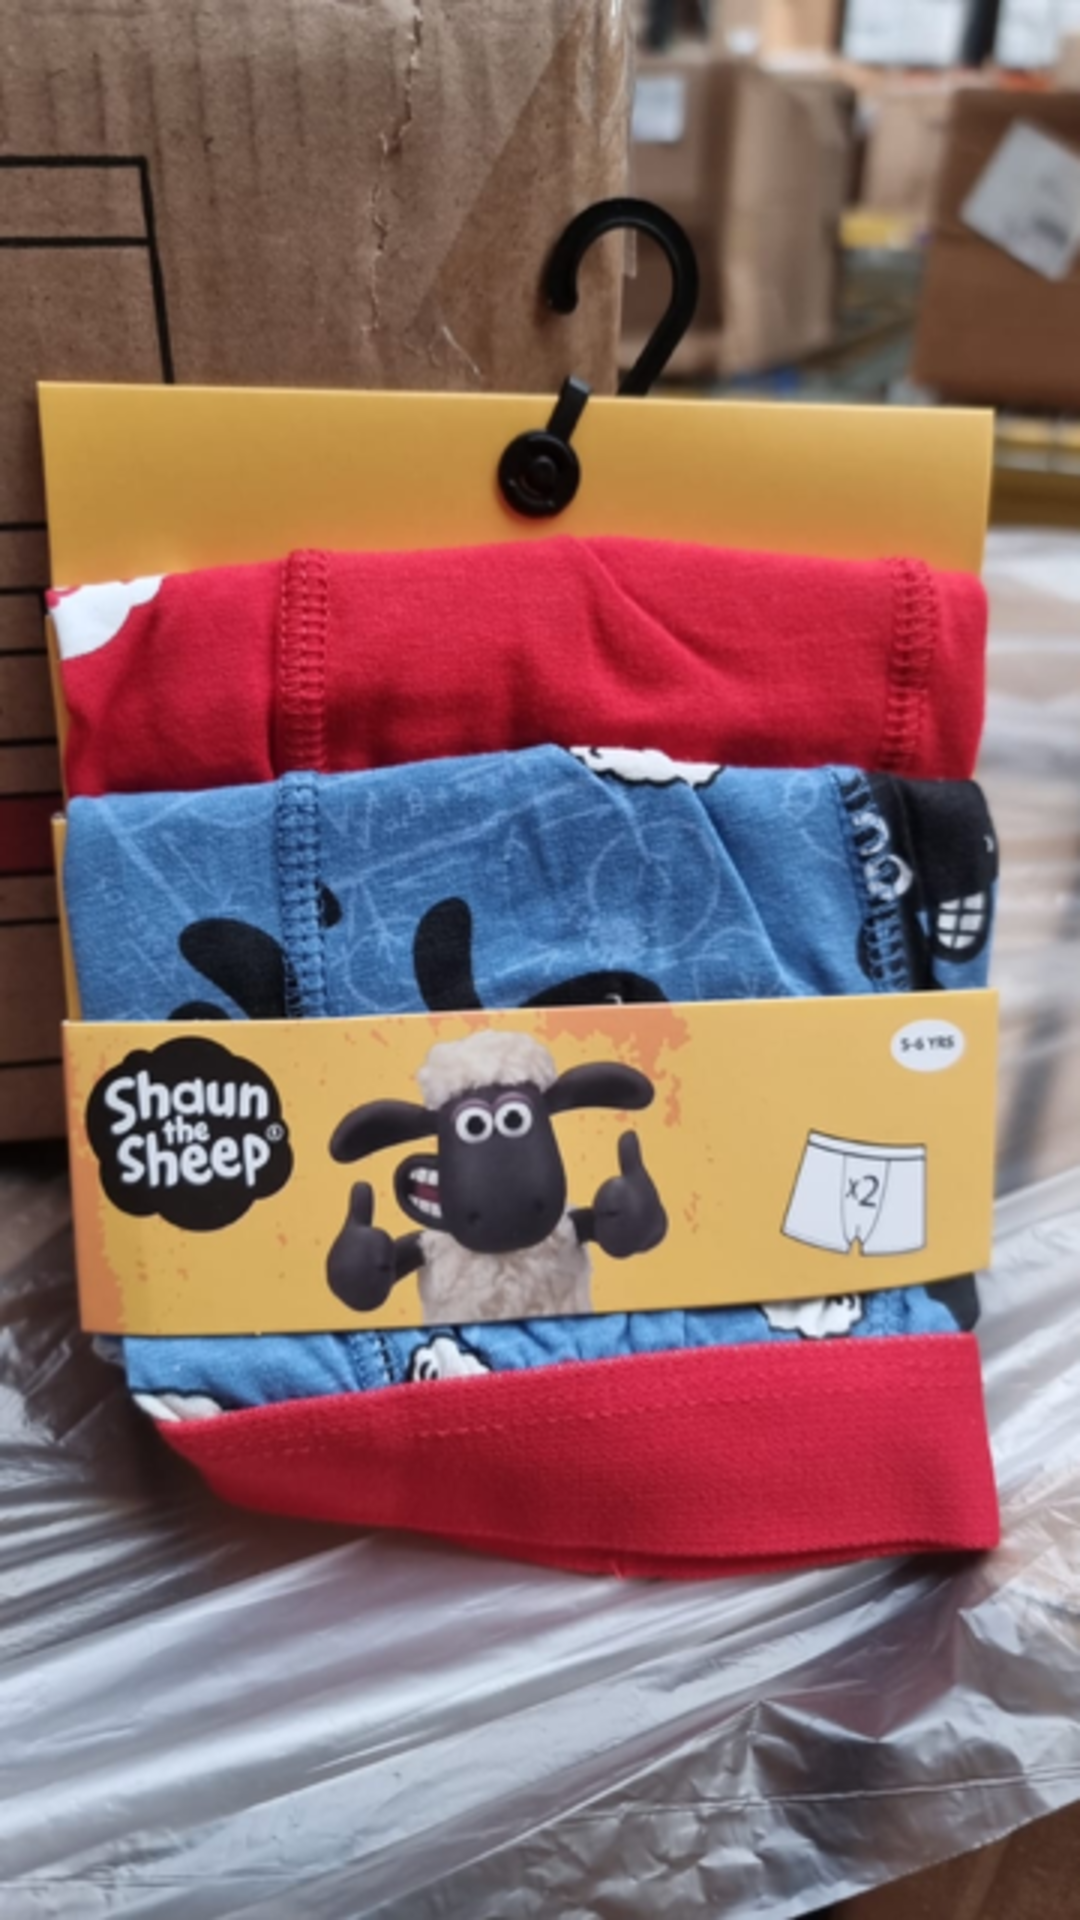 25 x New & Packaged Official Licenced Shaun The Sheep Packs of 2 Boxer Shorts. Sizes: 1-2, 3-4, 5-